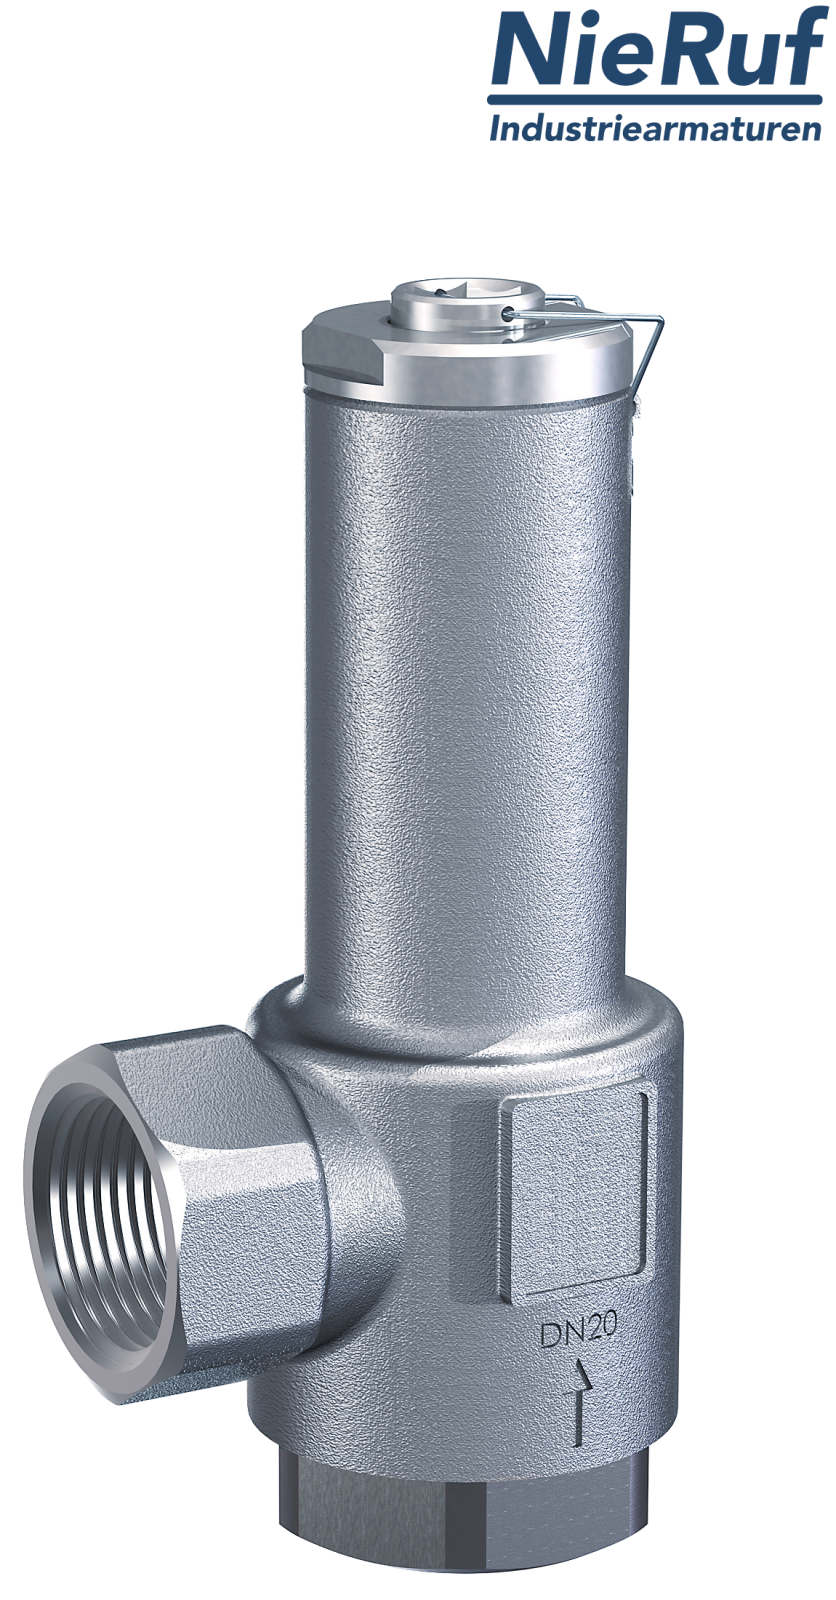 angle-type overflow valve 3/8" inch fm UV03 stainless steel AISI 316L 2 - 12 bar